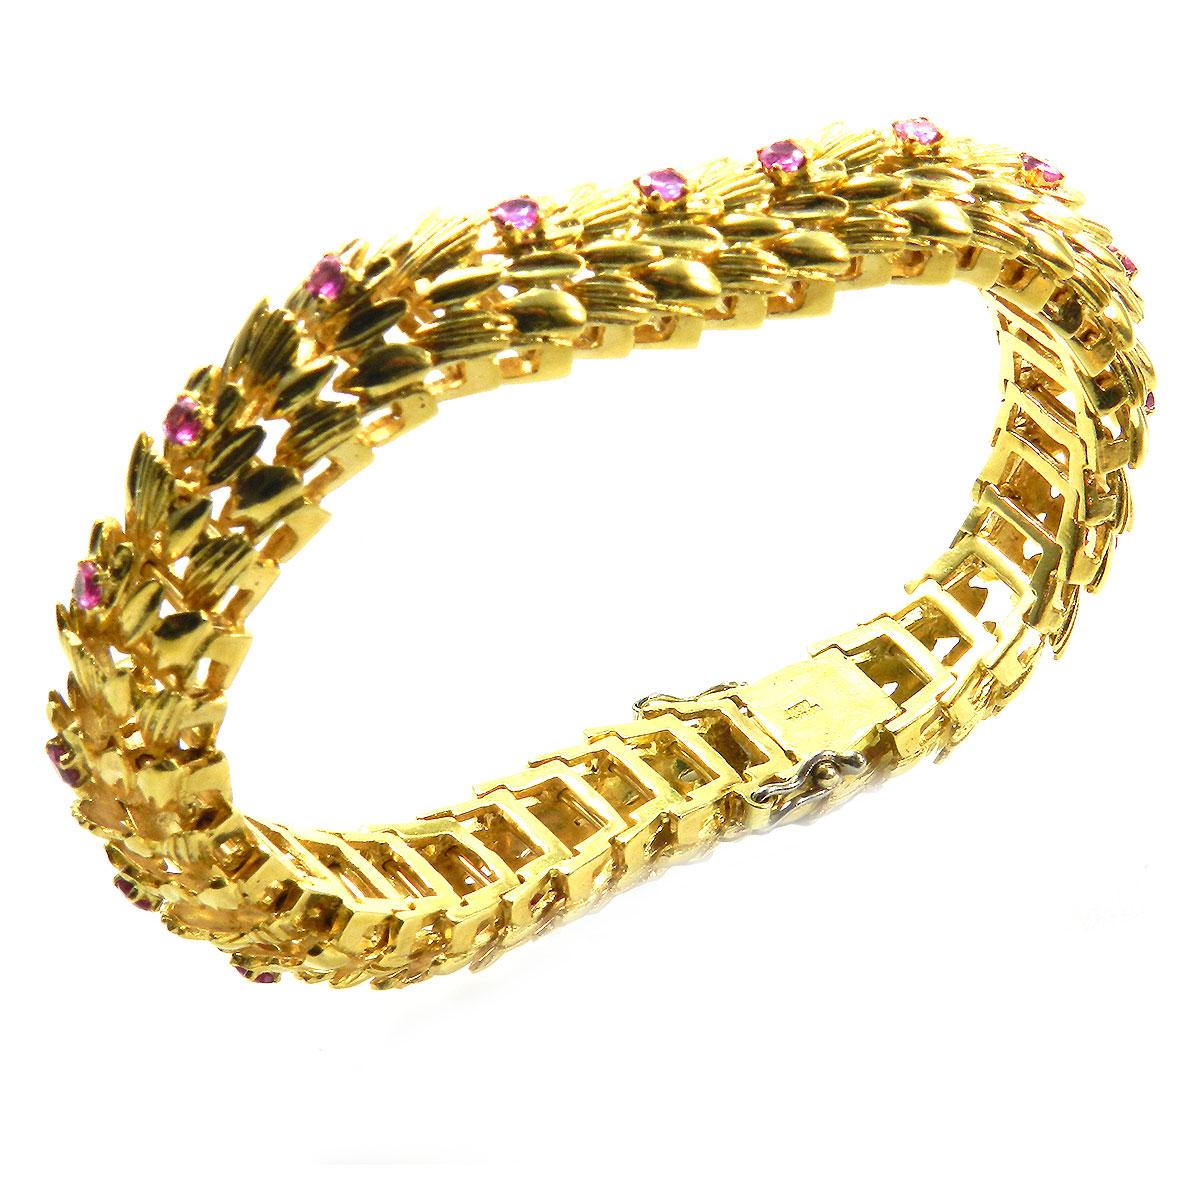 Ruby and 18K Textured Yellow Gold Bracelet 

Decorative gold bracelet made of textured links with a finely structured decoration, set with 20 rubies, totaling ca. 1.4 ct. 
 

750/18 K gold
20 rubies, total circa 1.4 ct
Size 17.5 cm long, 2 cm